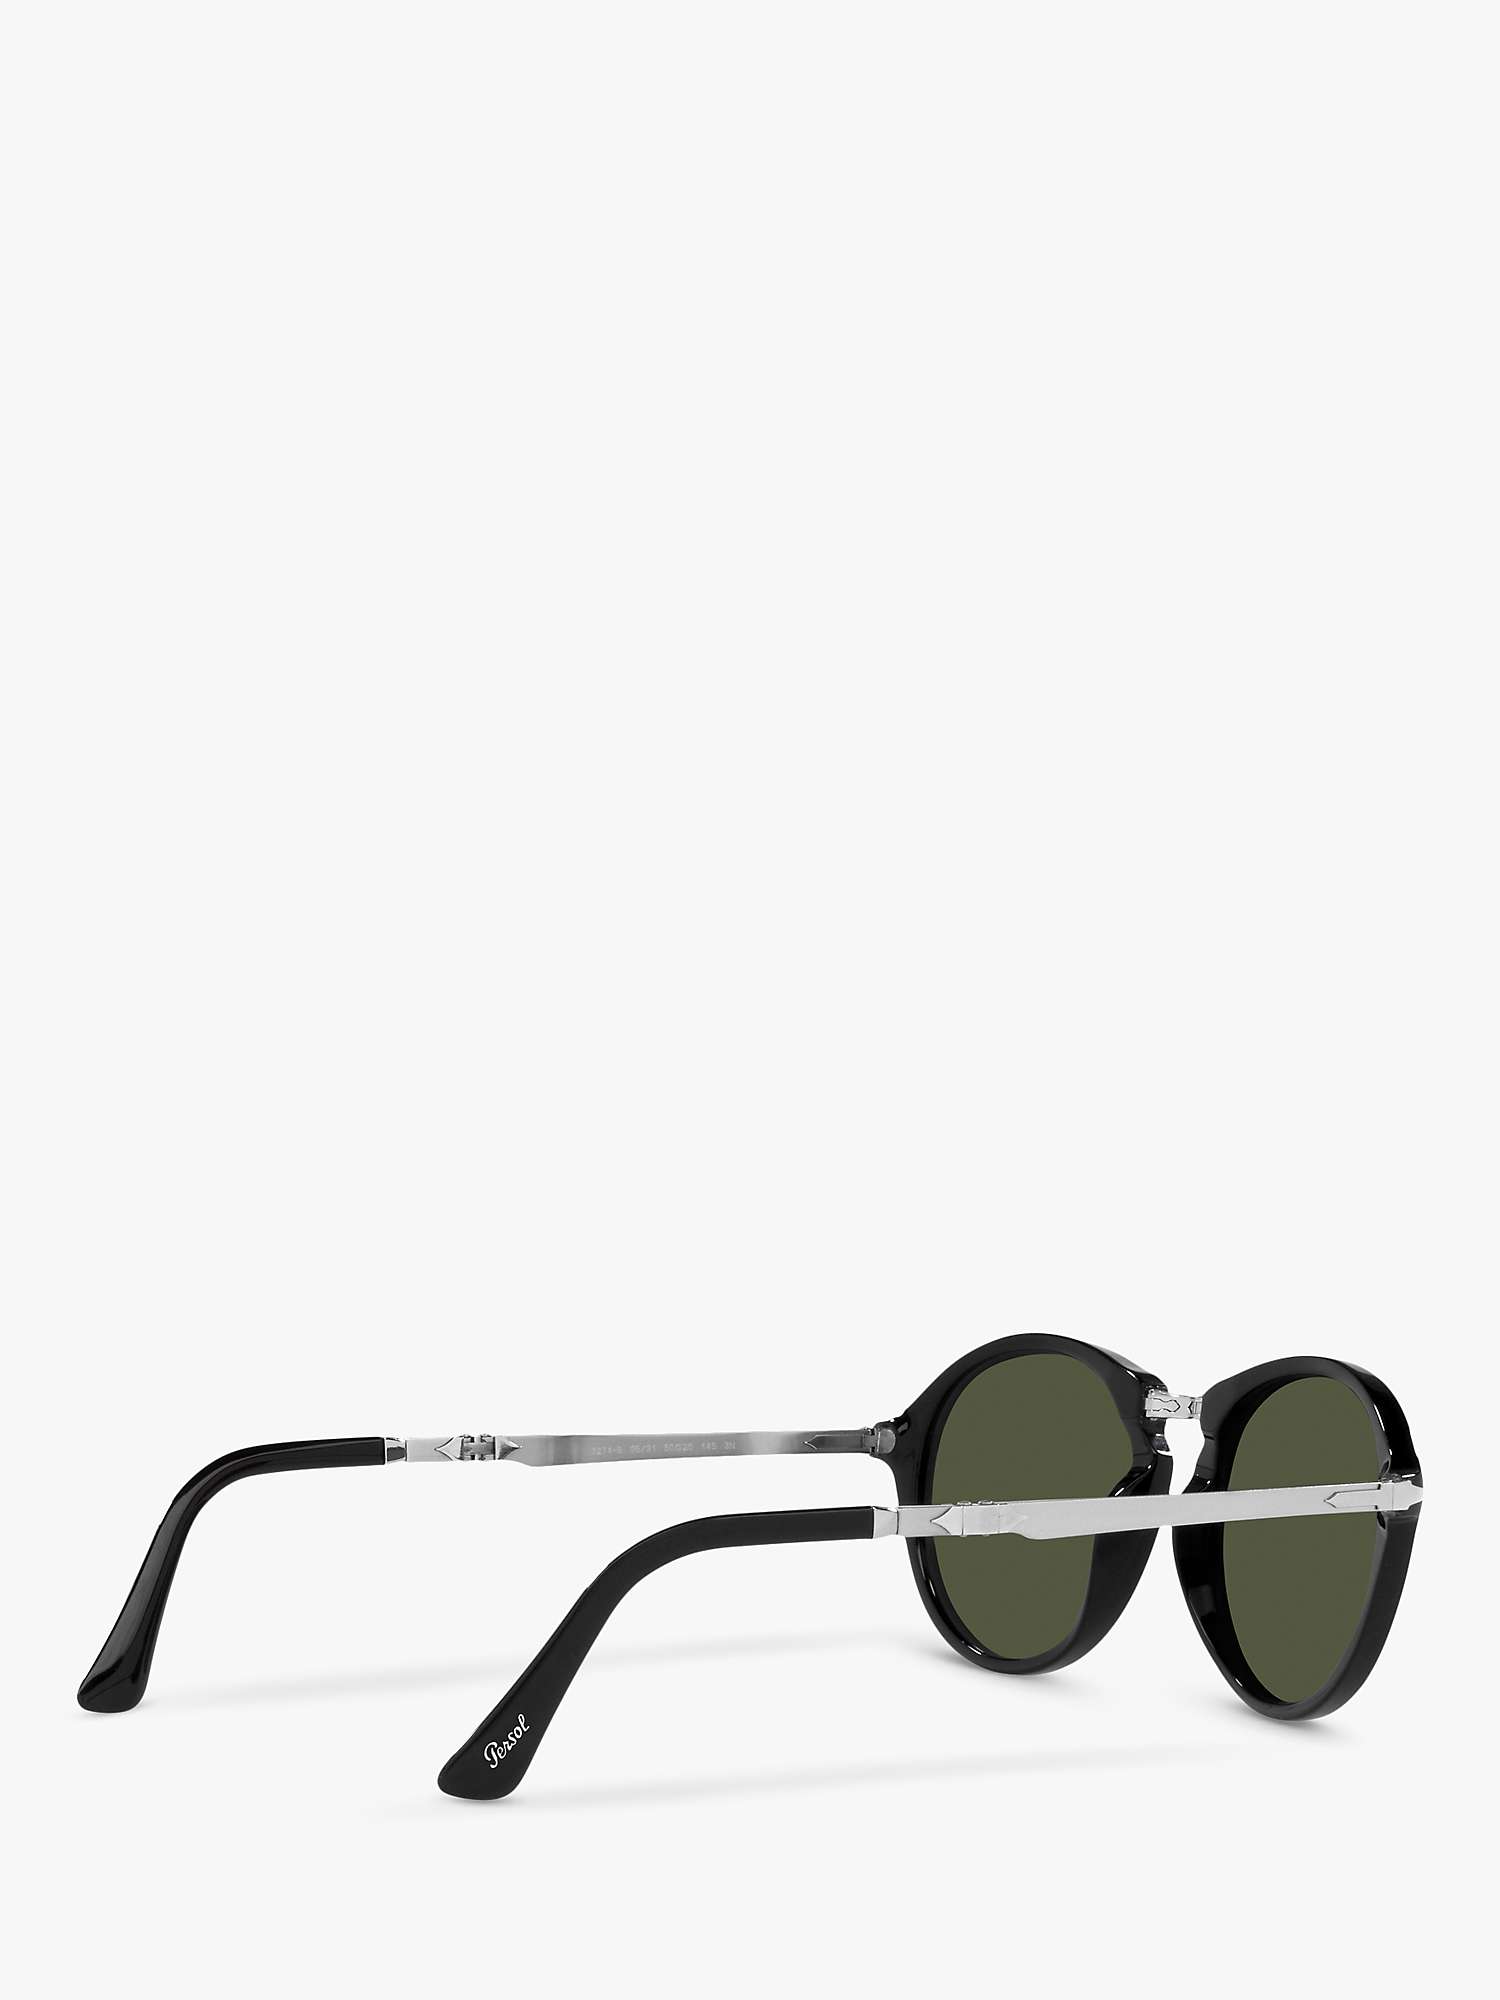 Buy Persol PO3274S Unisex Oval Sunglasses, Black/Green Online at johnlewis.com